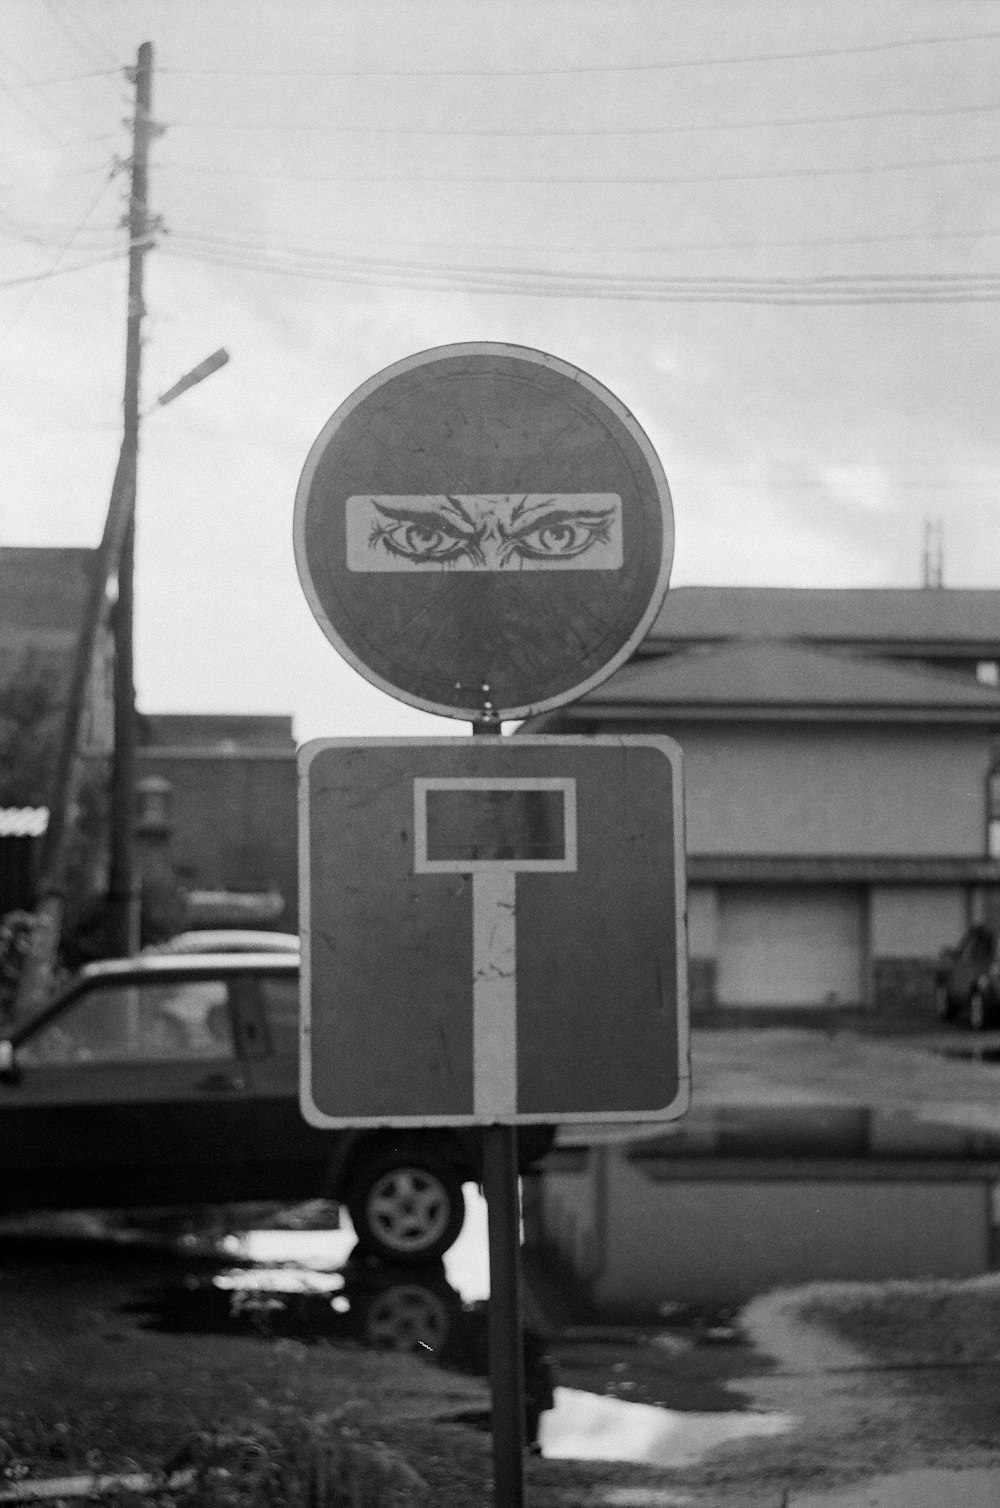 grayscale photo of no smoking sign